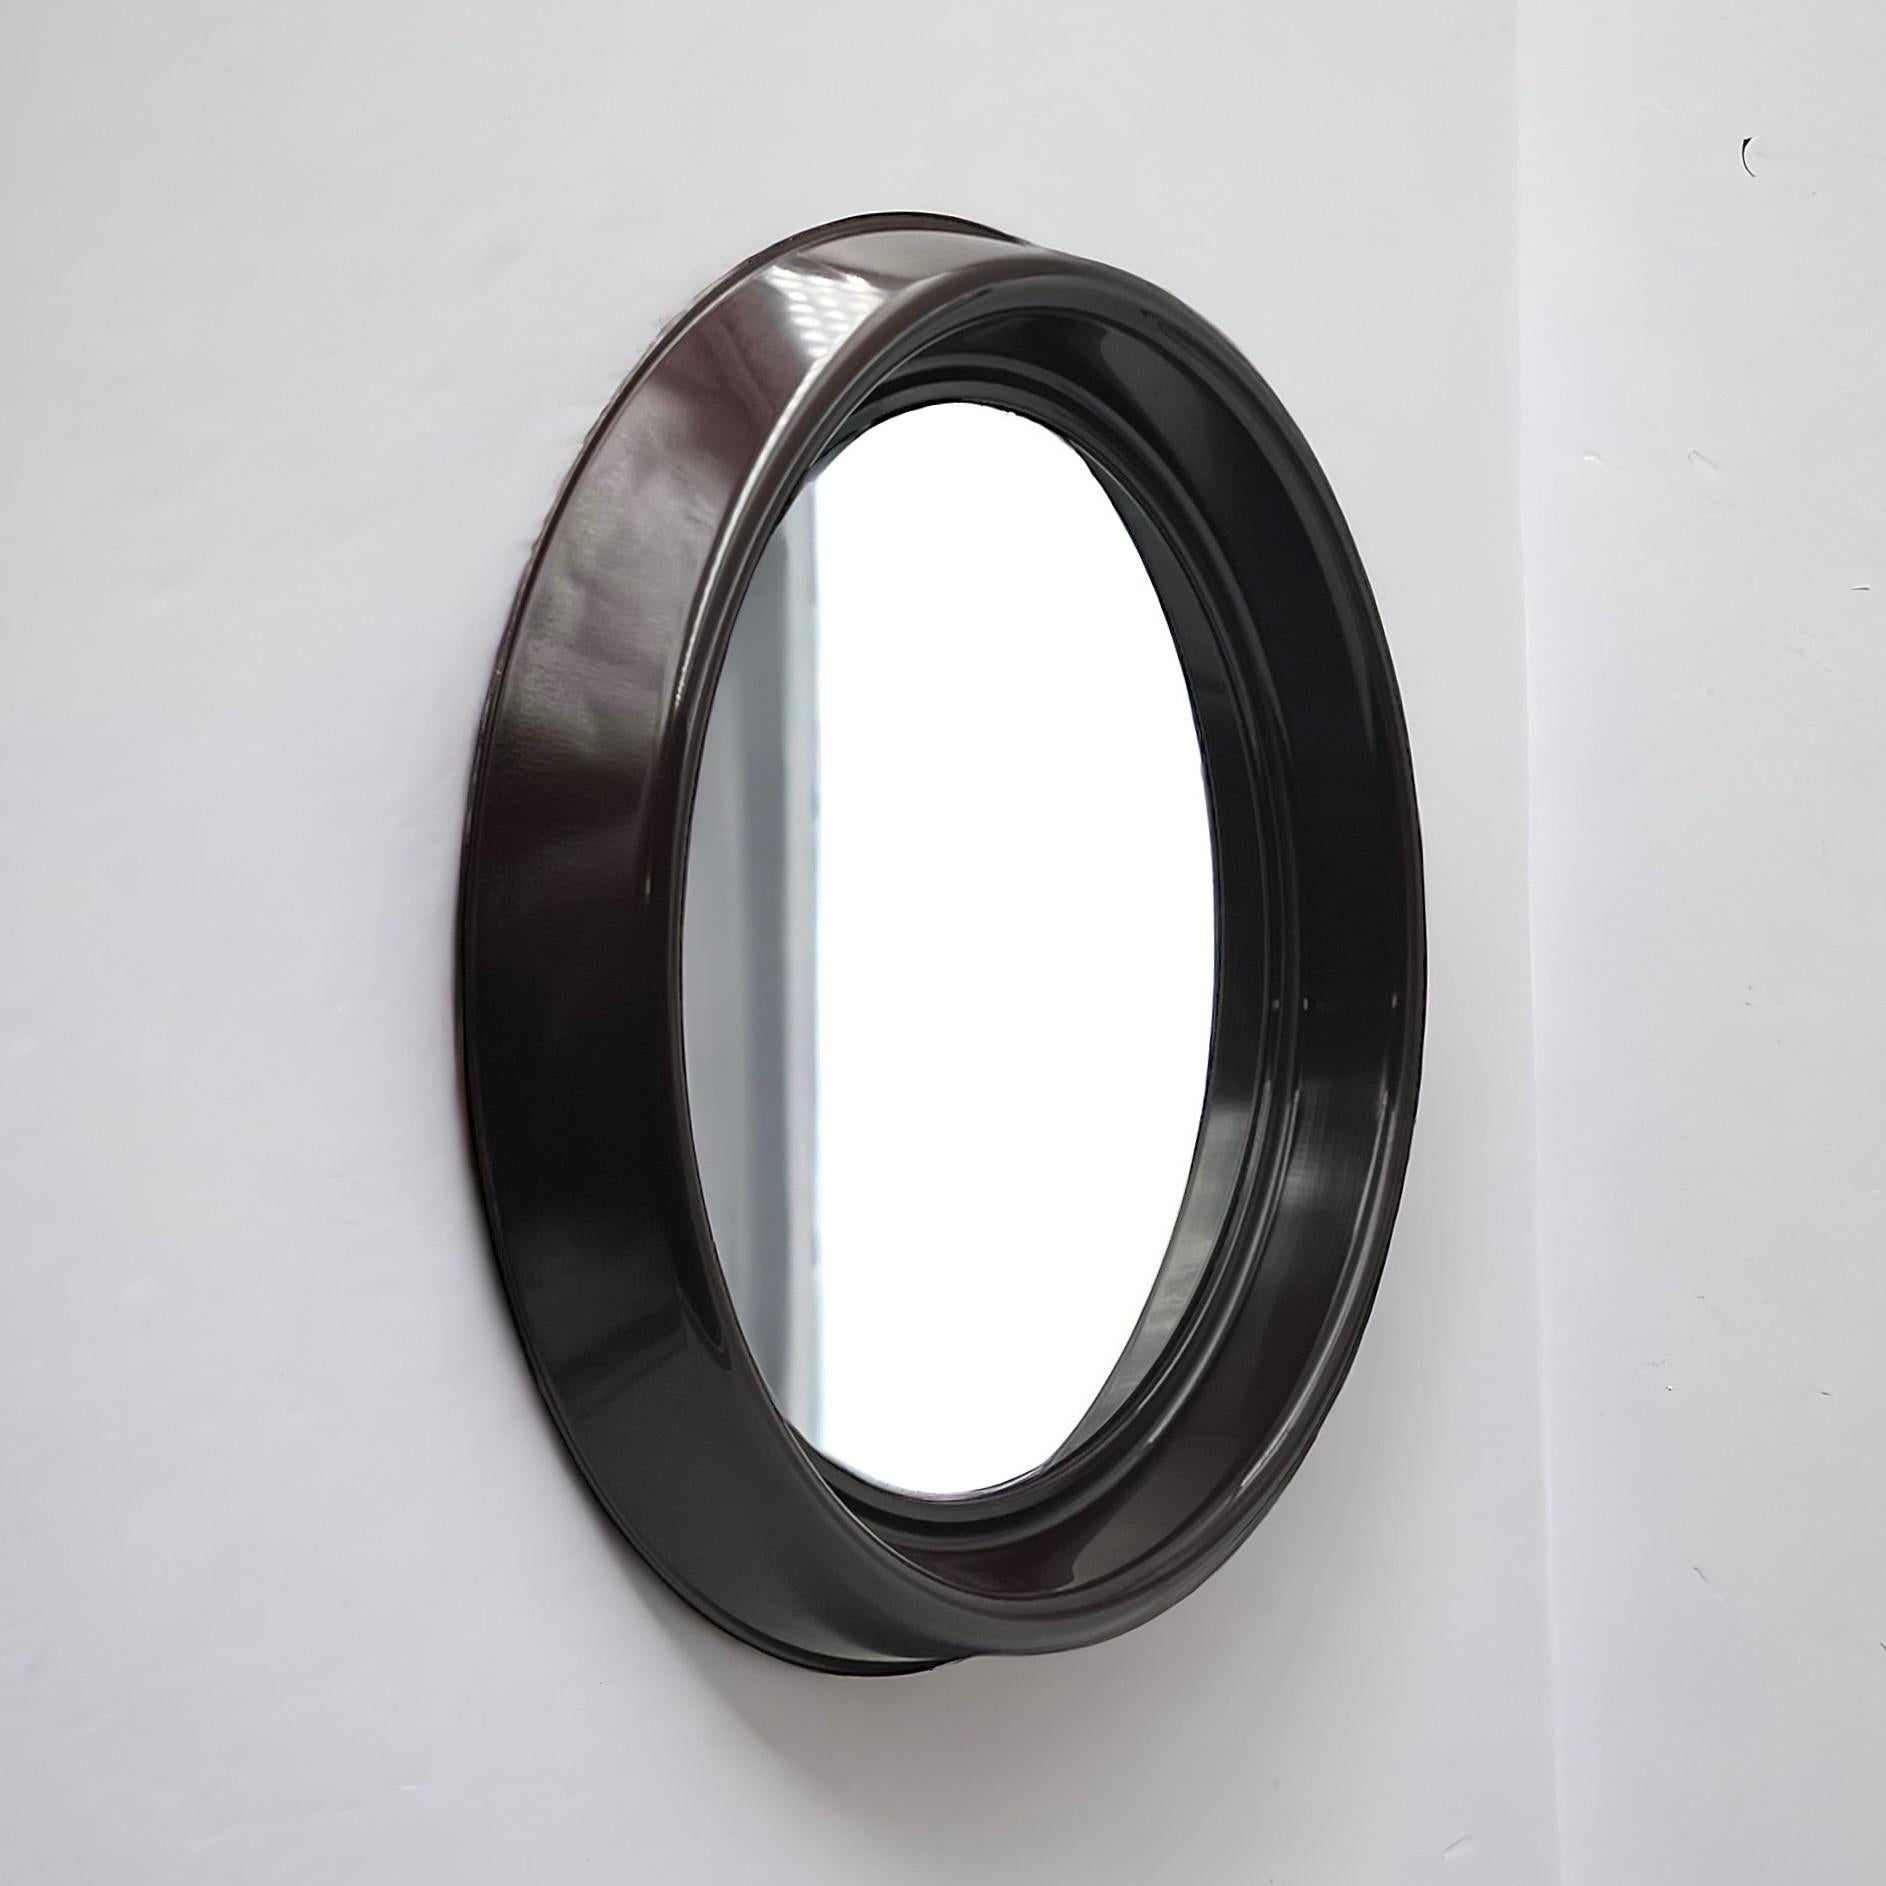 Italian Space Age Round Mirror in Chocolate Brown Plastic by Dal Vera, Italy, 1970s For Sale